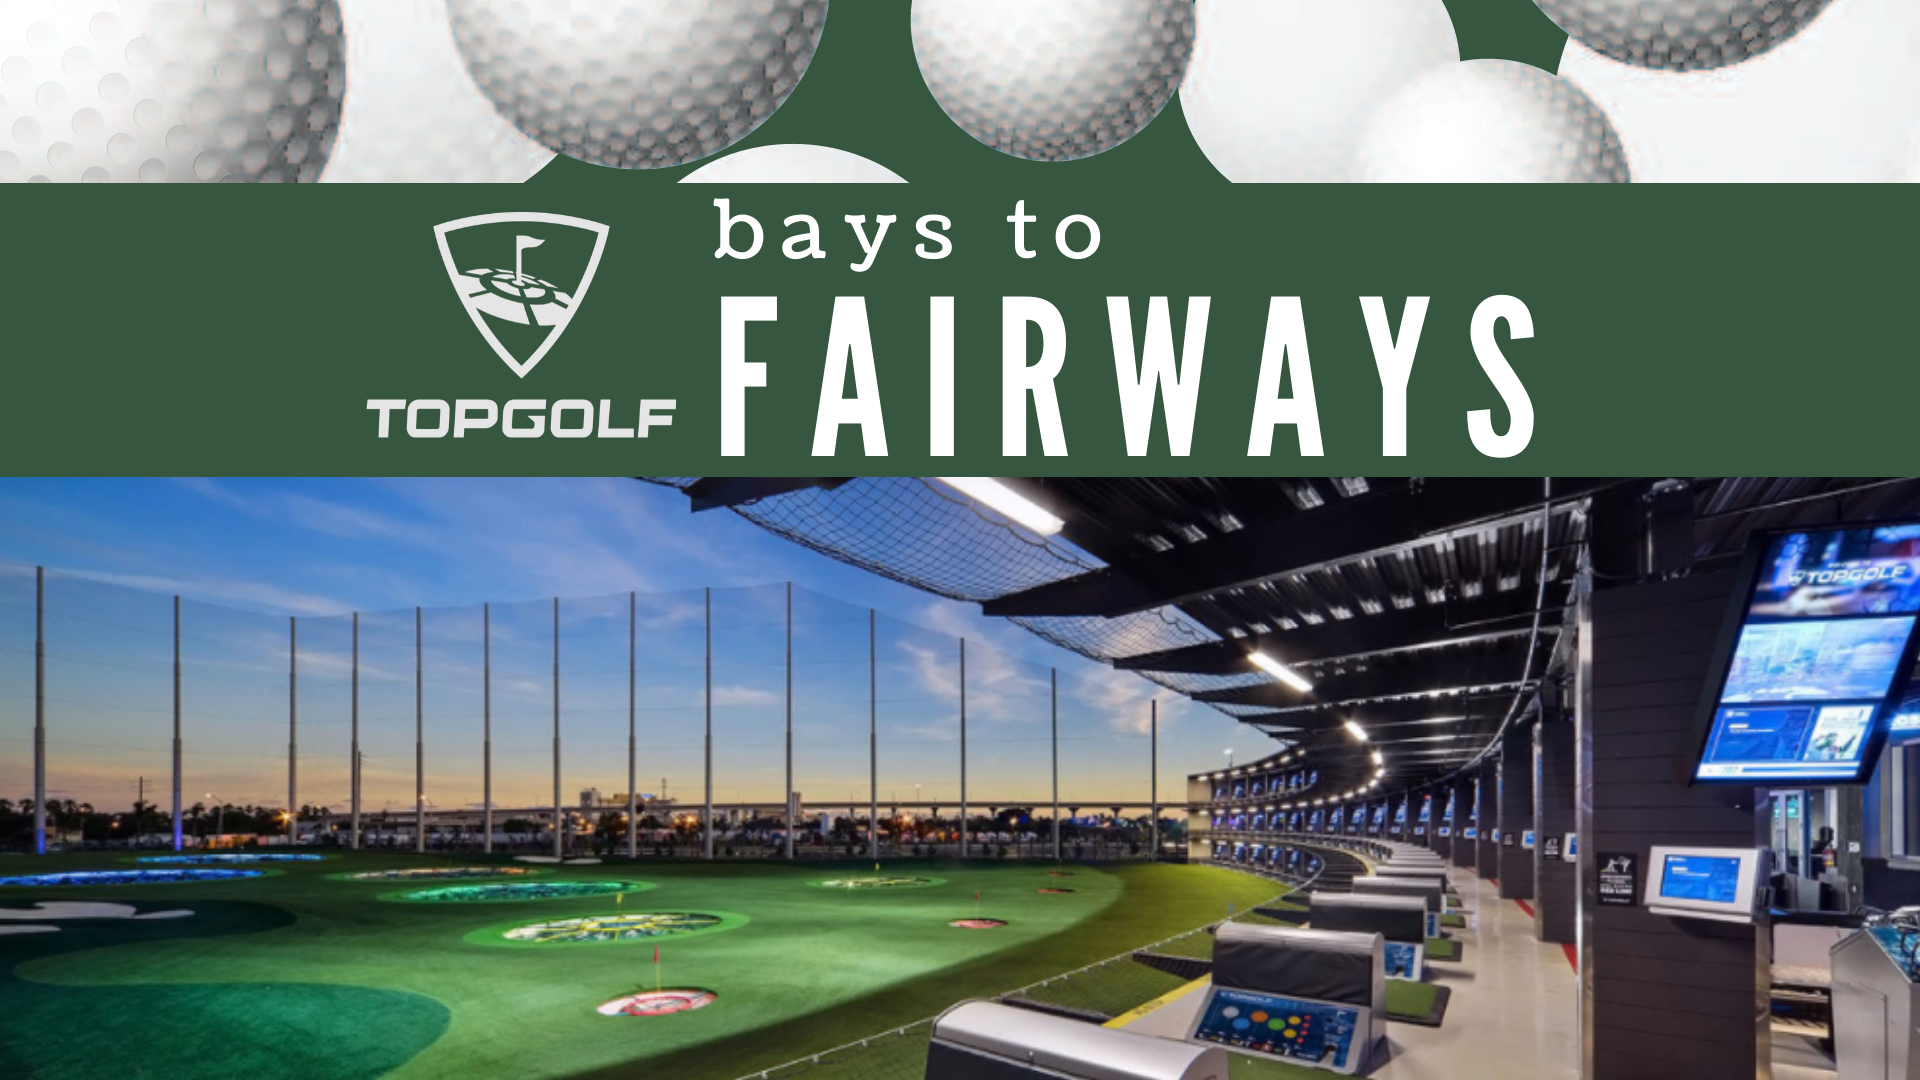 JOIN US AT TOPGOLF